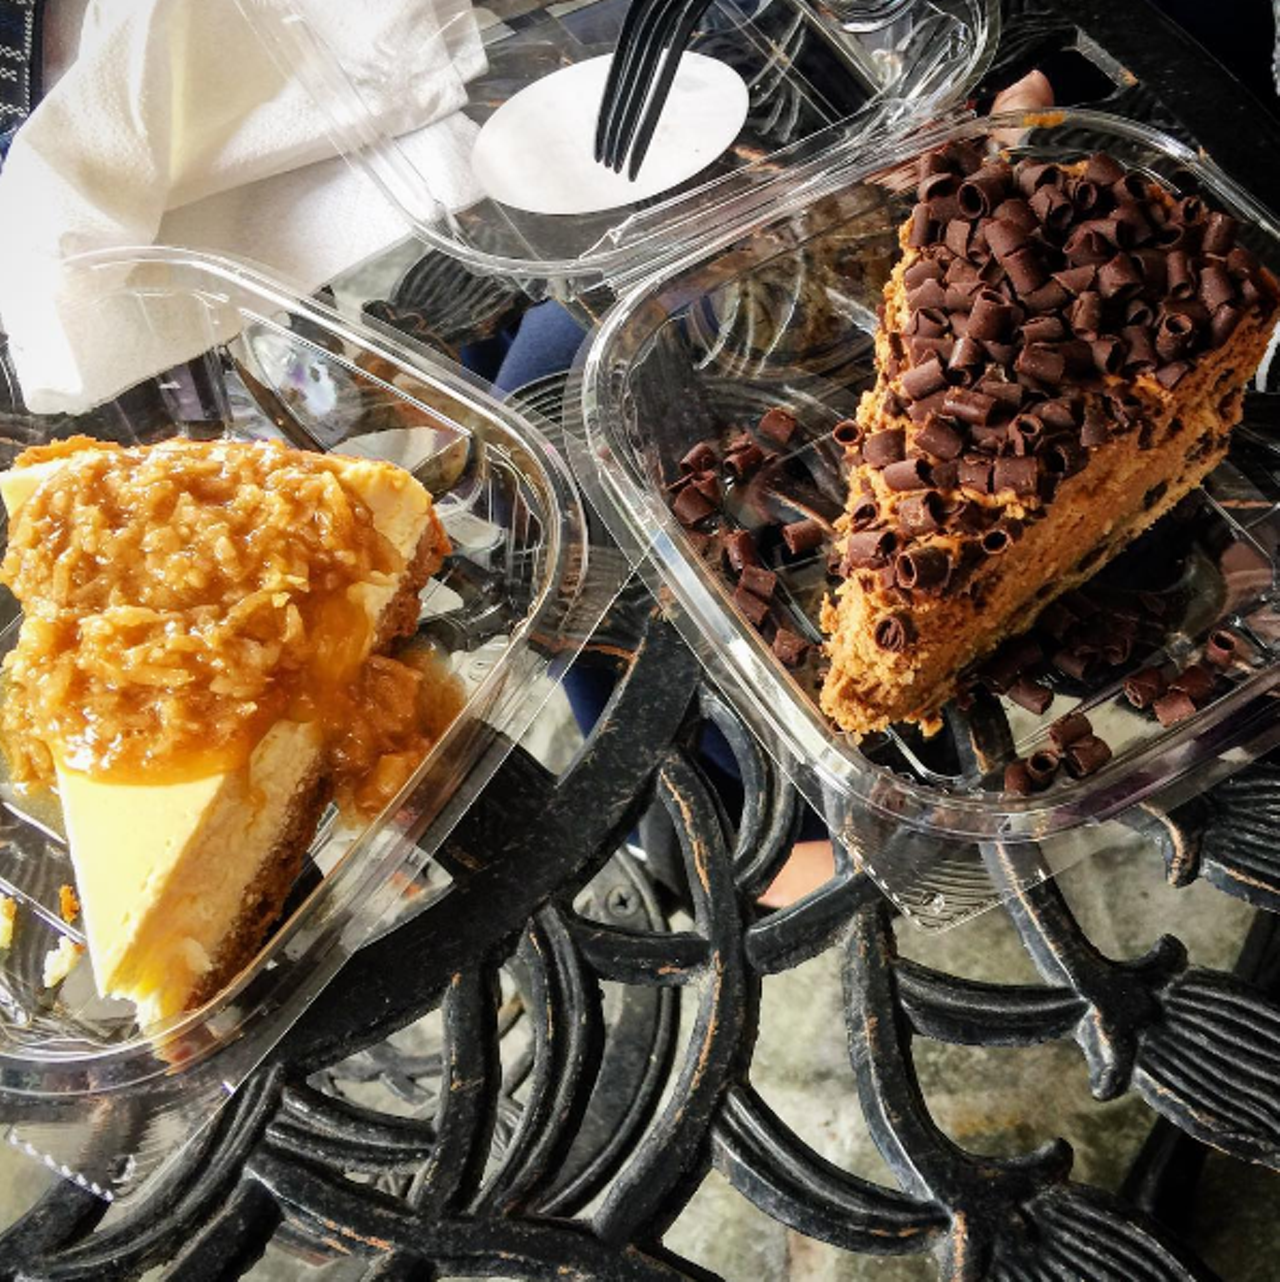 The Dessert Lady
7600 Dr. Phillips Blvd., 407-999-5696
The Dessert Lady specializes in cakes, cobblers and pies, but the coconut br&ucirc;l&eacute;e cheesecake is moist and creamy with a macadamia nut crust, toasted coconut and caramel topping.
Photo via marulollipop/Instagram